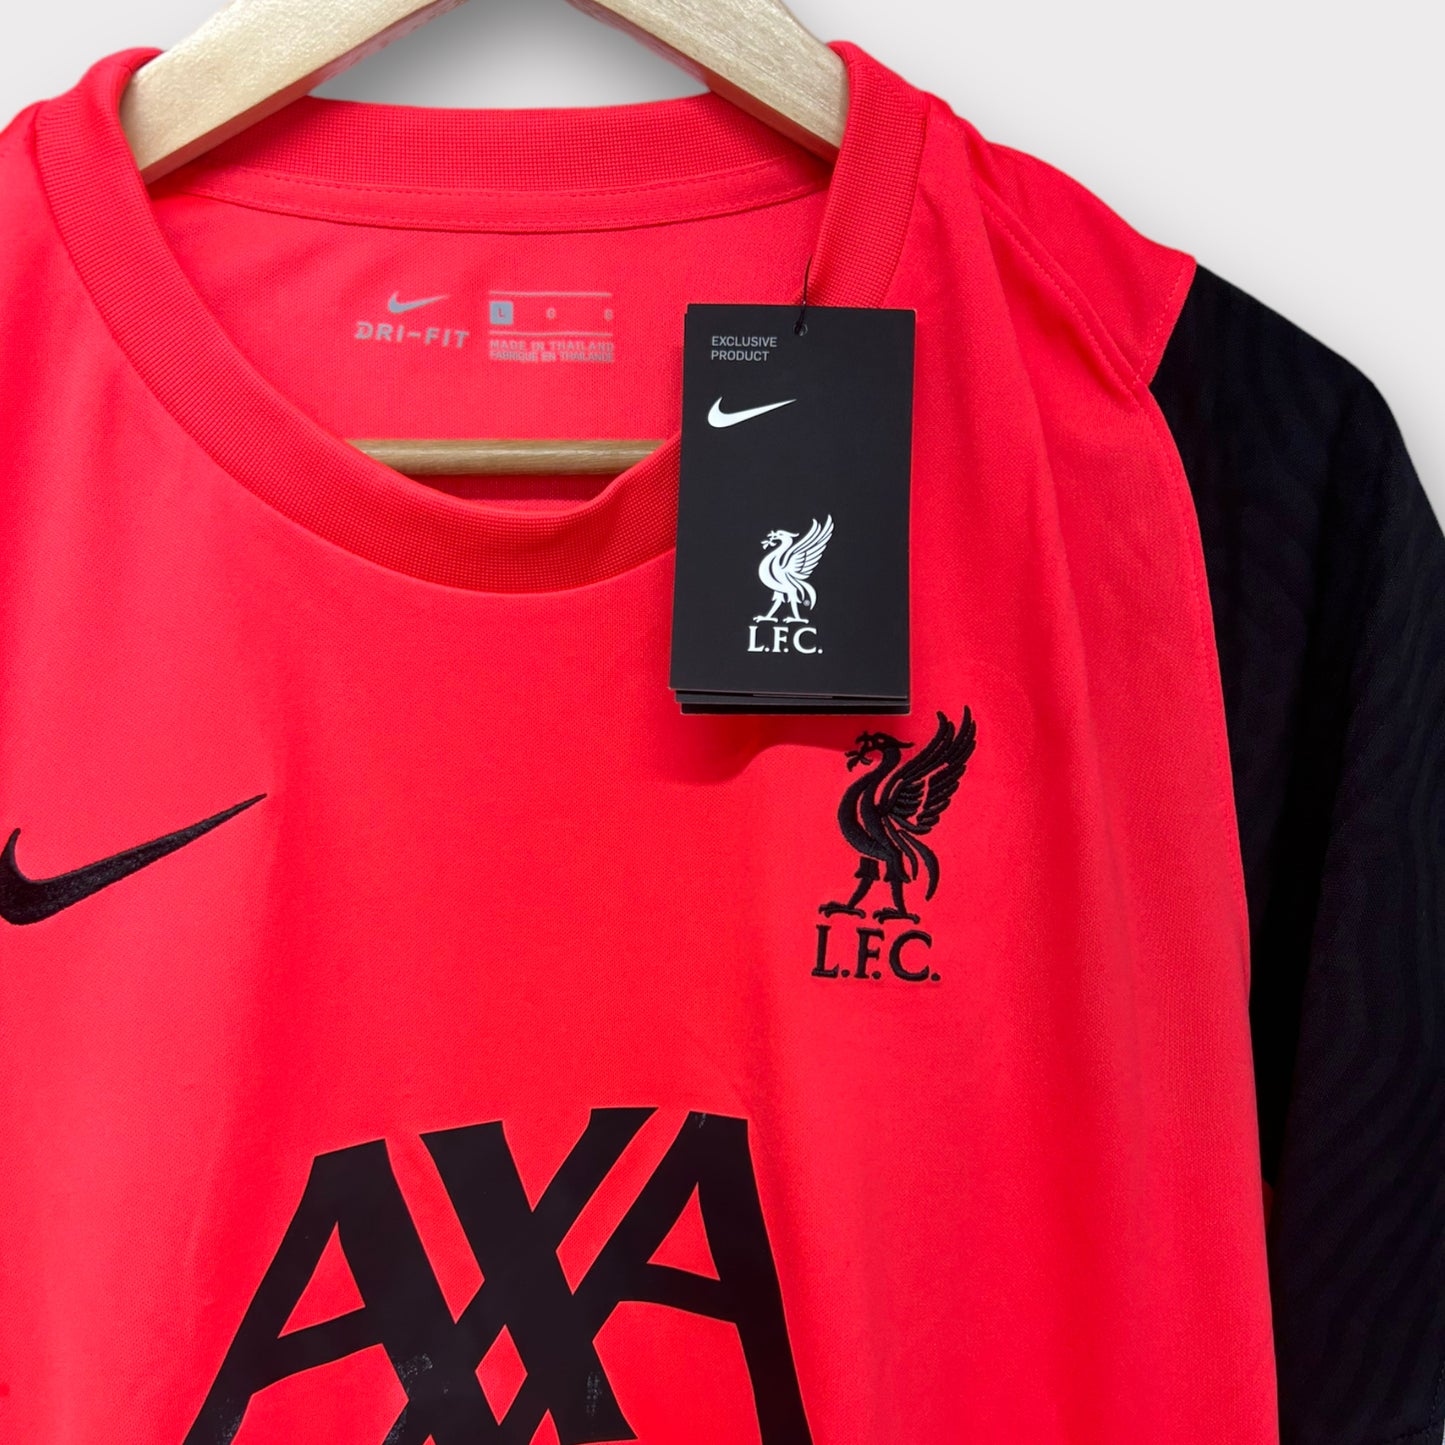 Liverpool 2020/21 Nike Training Shirt *New with Tags* (Large)